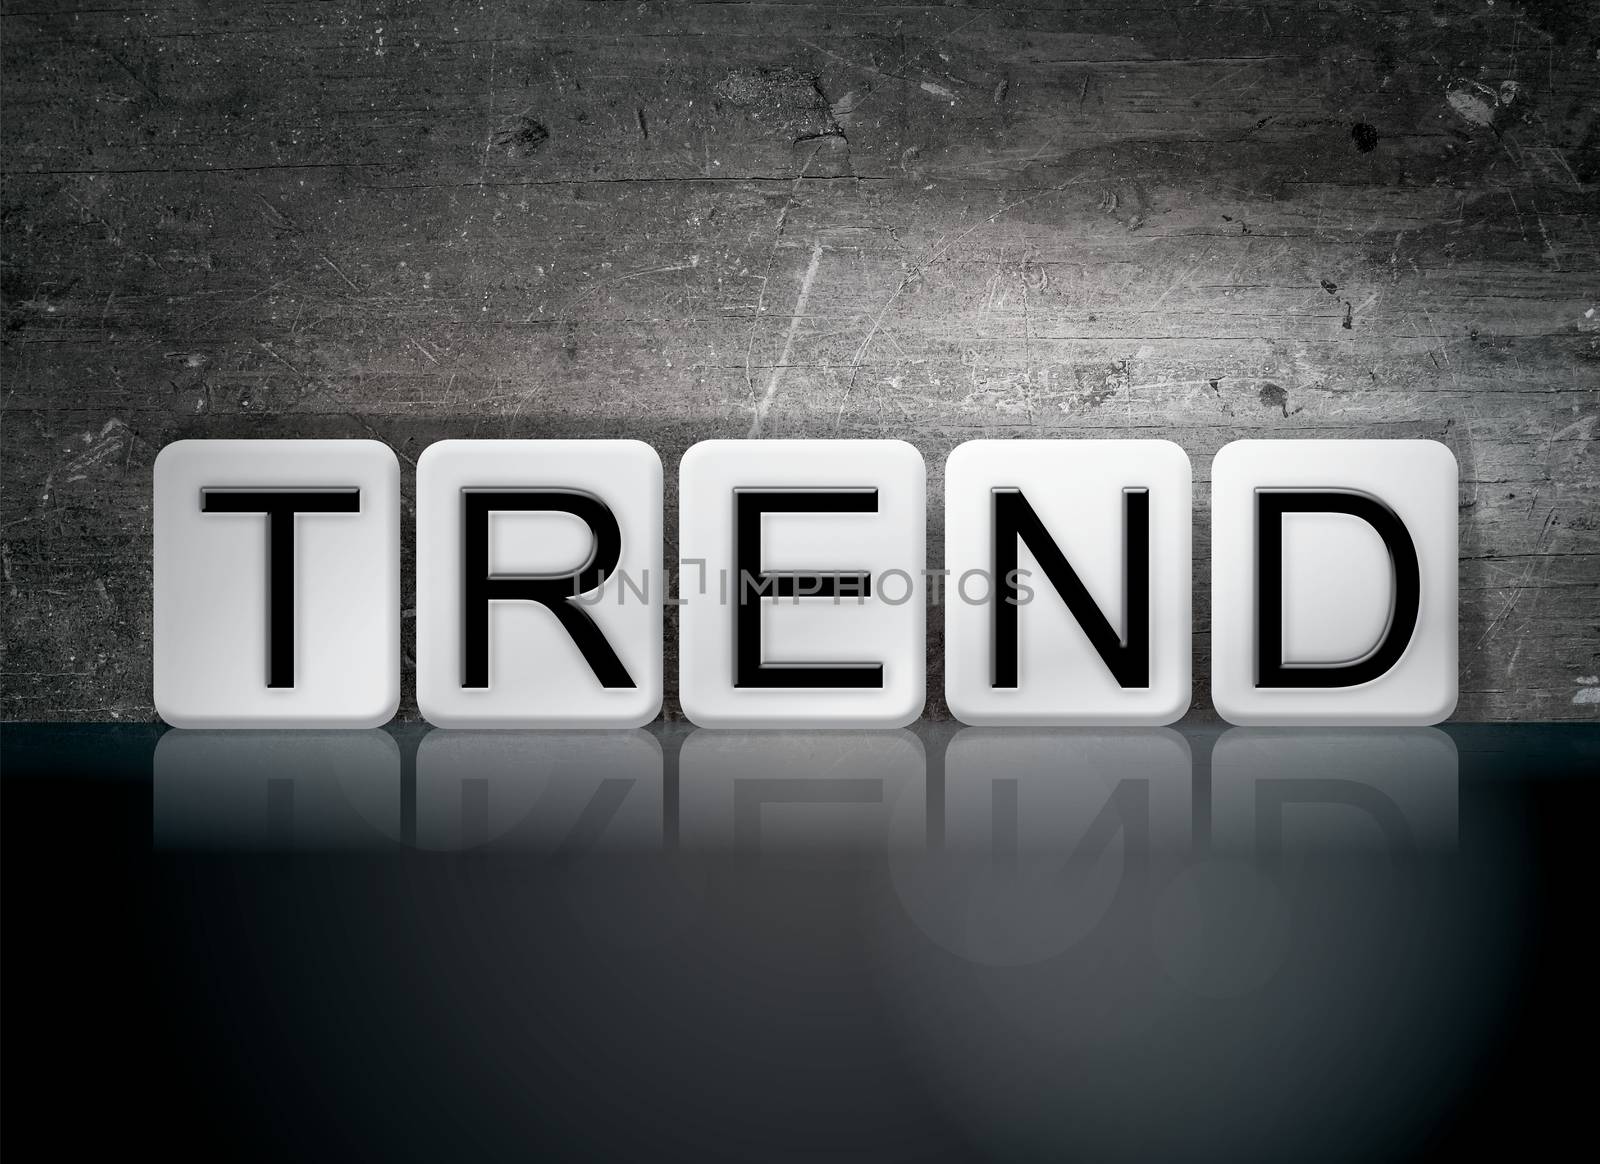 Trend Tiled Letters Concept and Theme by enterlinedesign